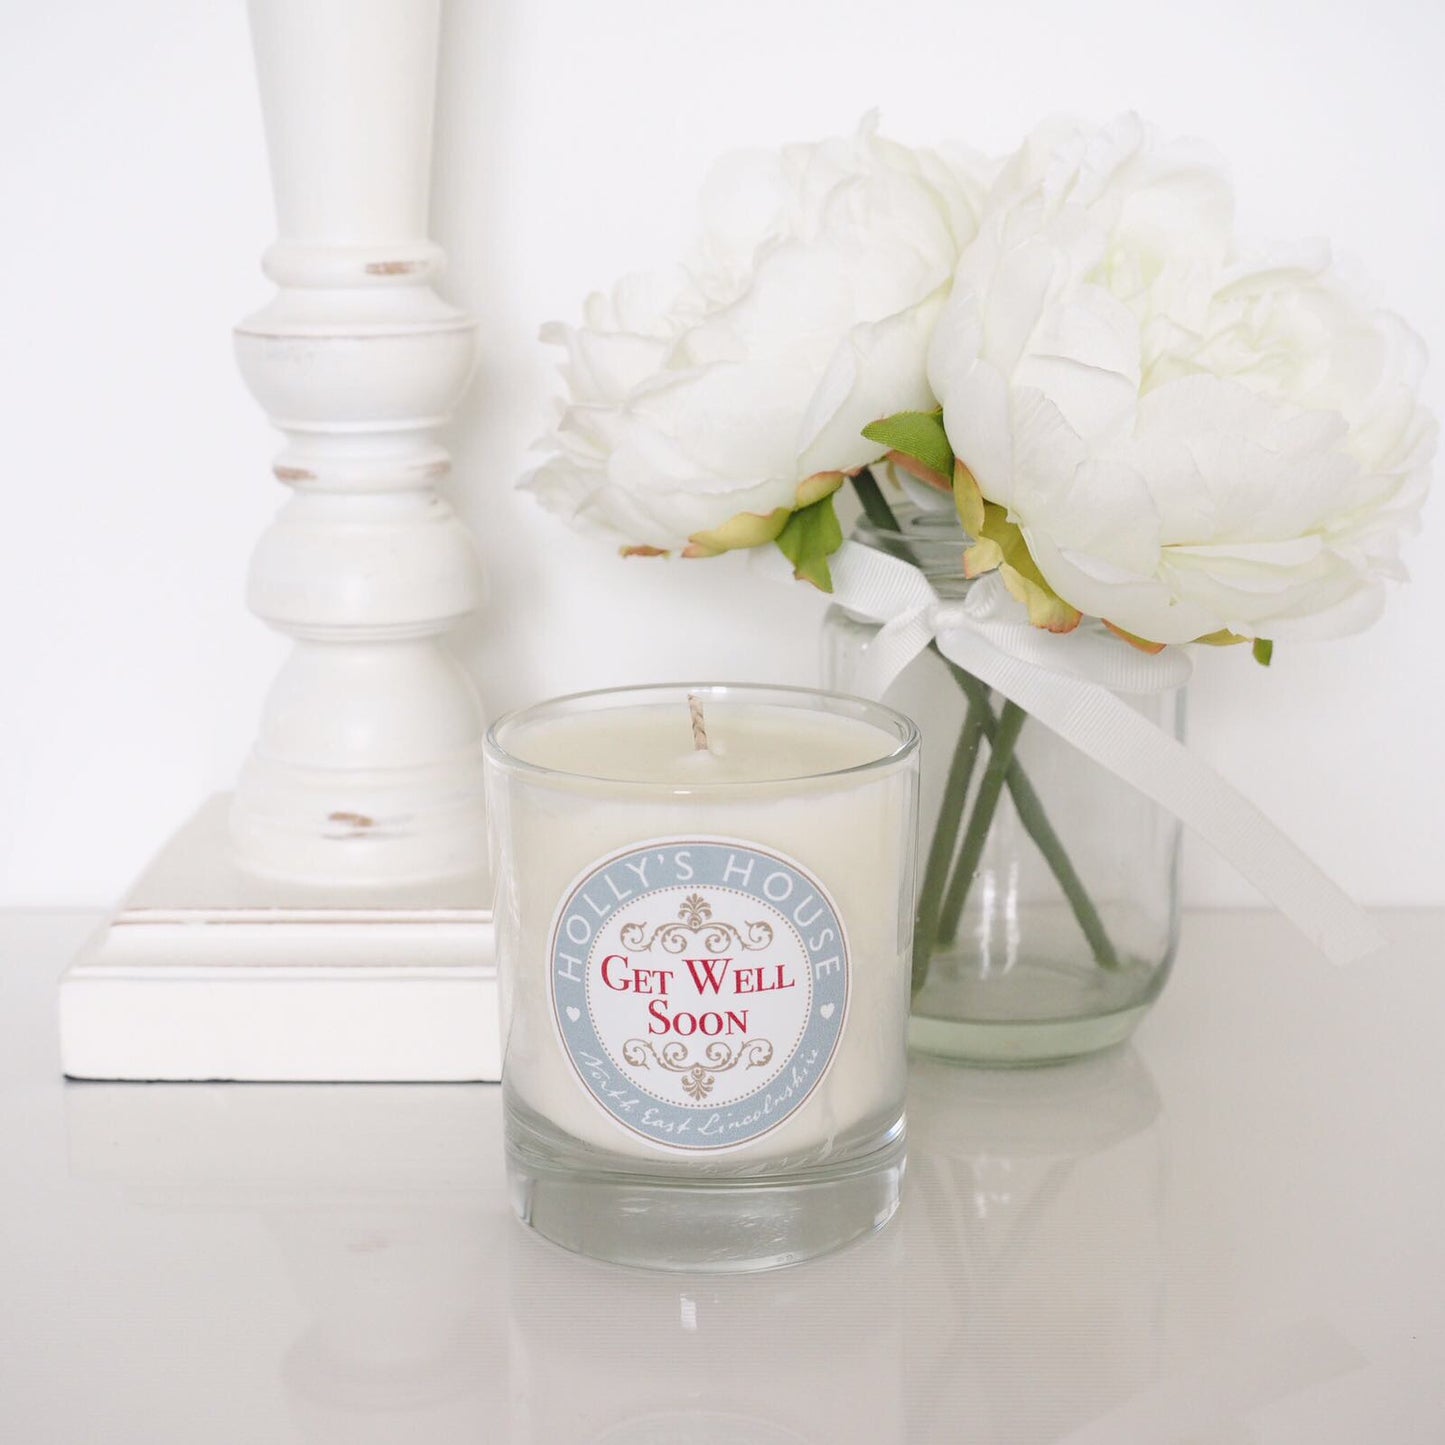 Get Well Soon Scented Candle